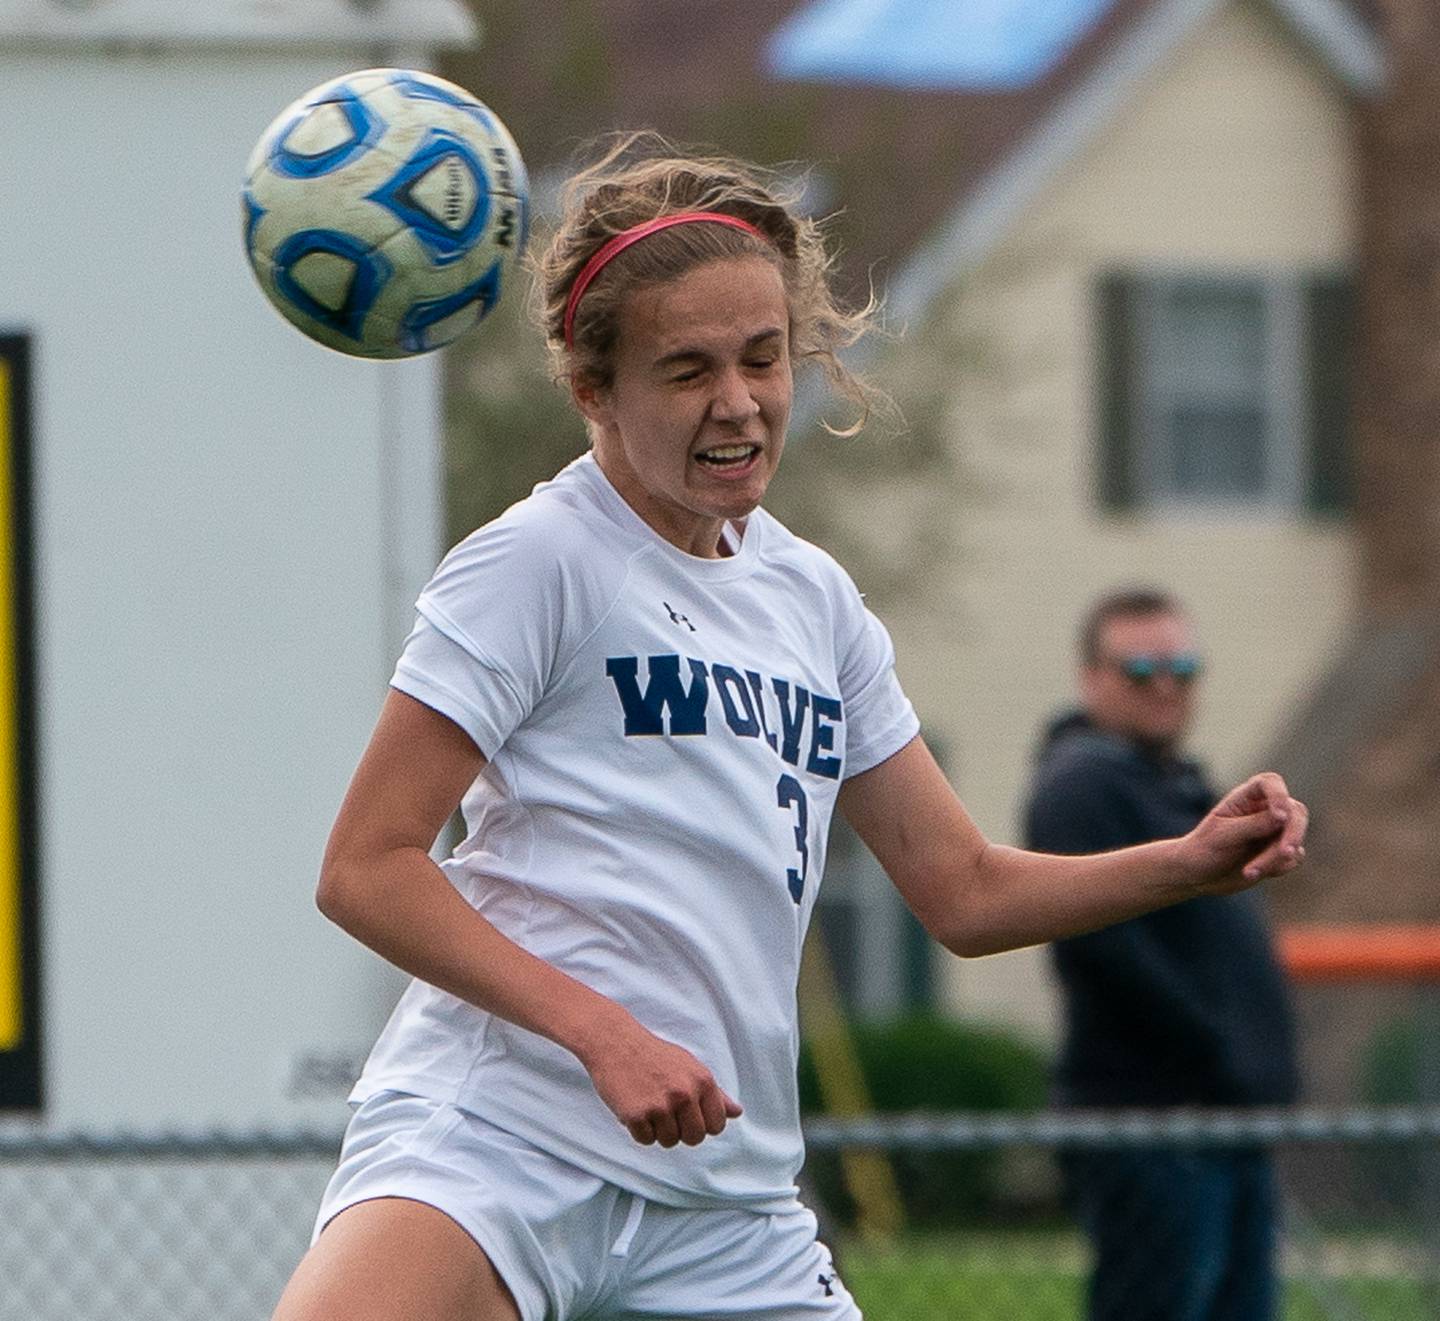 Oswego East's Anya Gulbrandsen (3) goes up for a header against Oswego during a soccer match at Oswego High School on Monday, May 2, 2022.